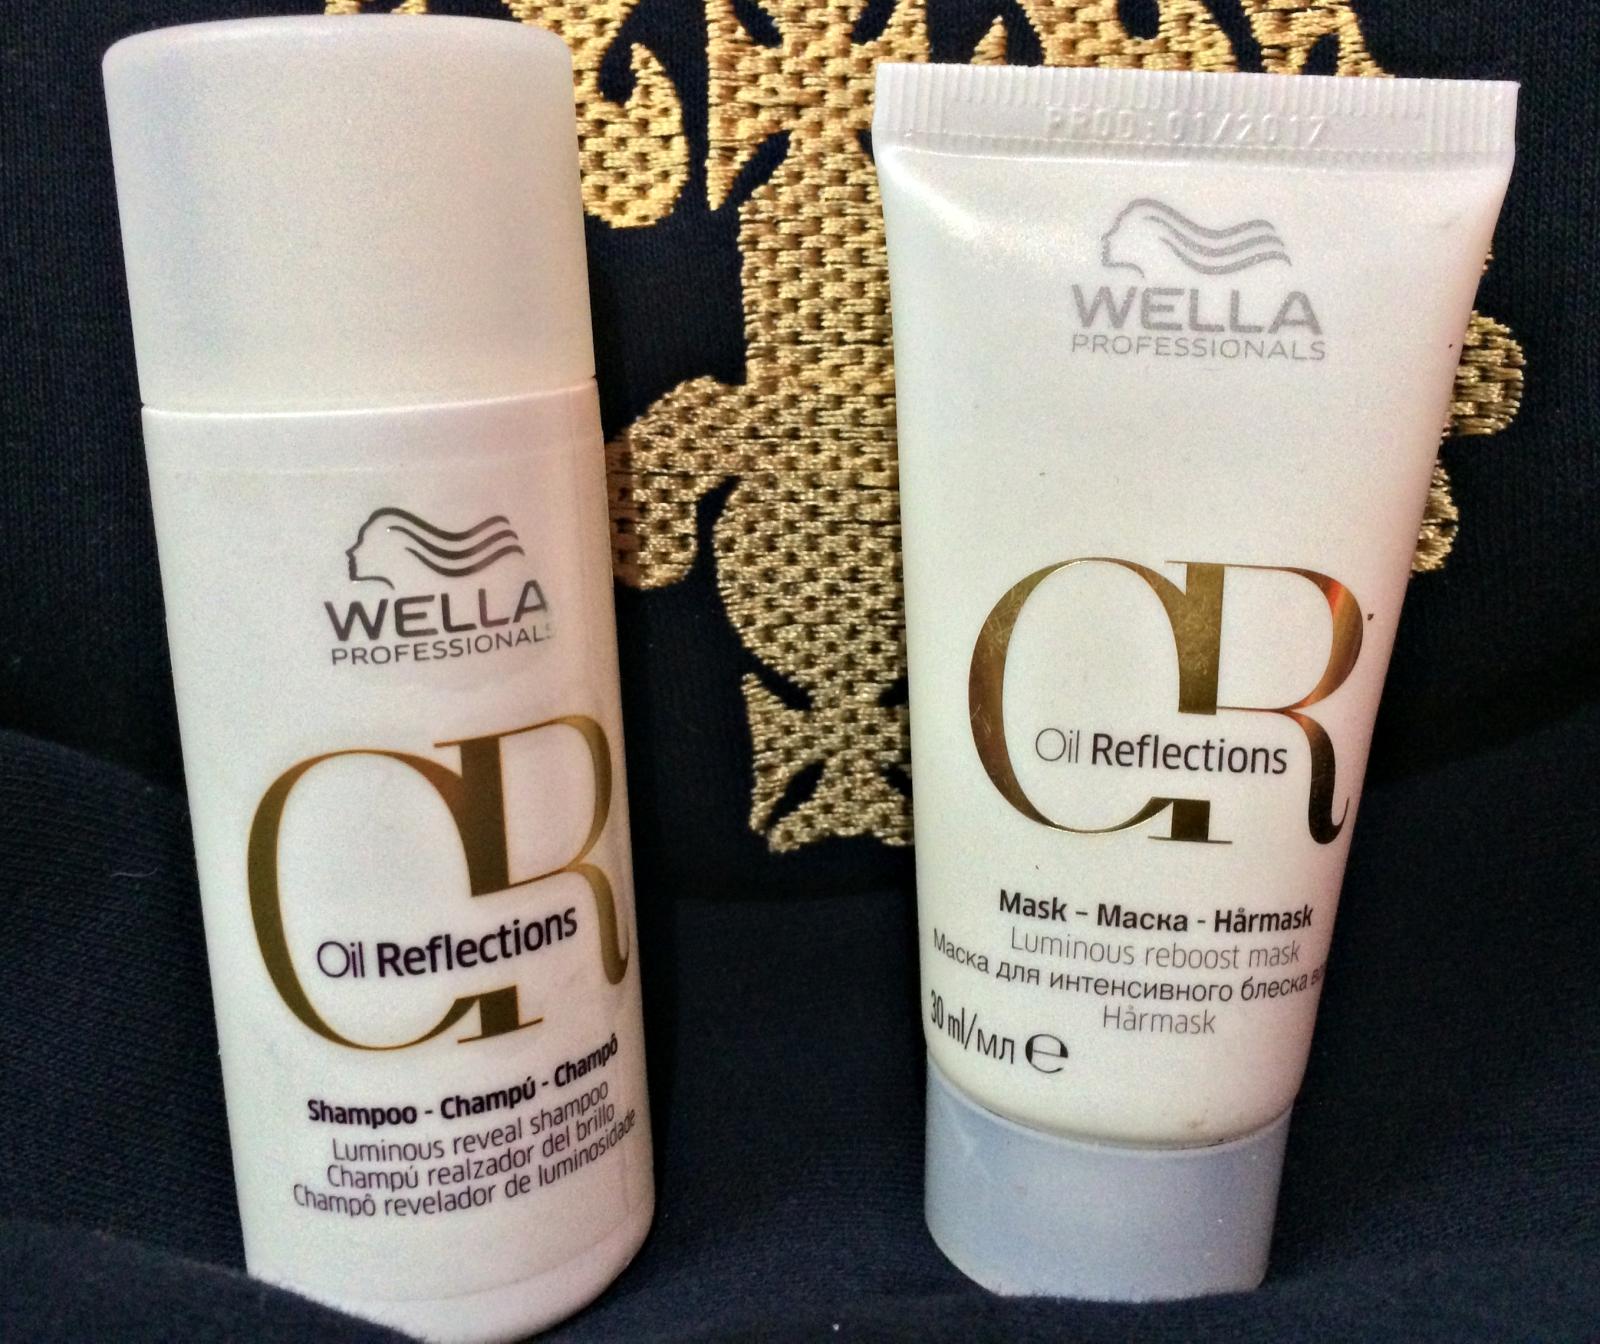 Wella Oil Reflections Shampoo and Hair Mask